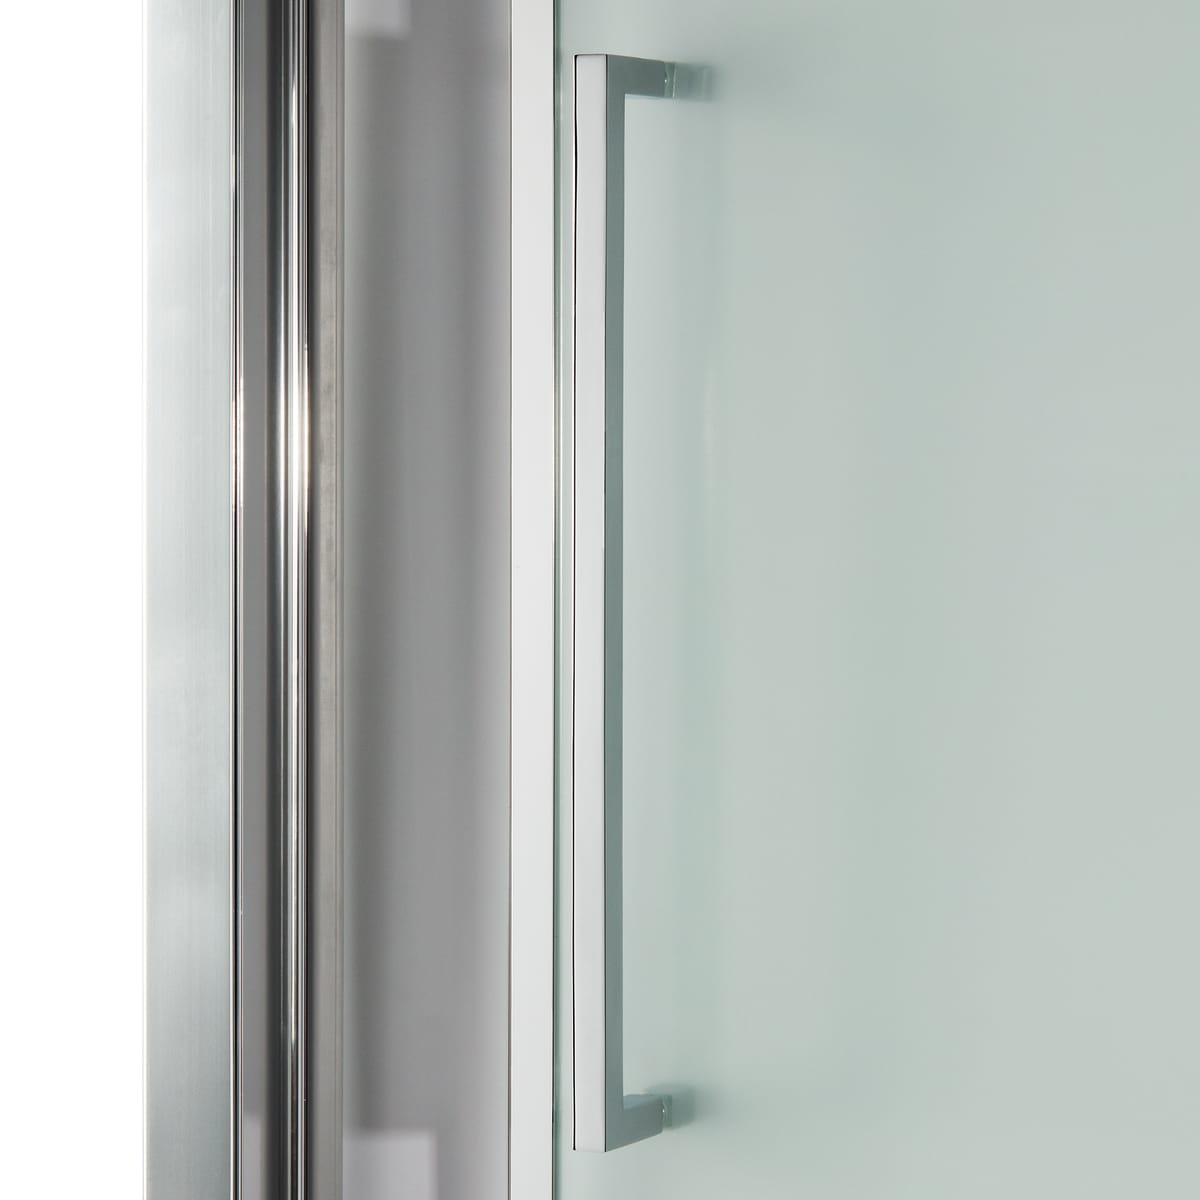 RECORD SWING DOOR L 92-96 H 195 CM CLEAR GLASS 6 MM CHROME